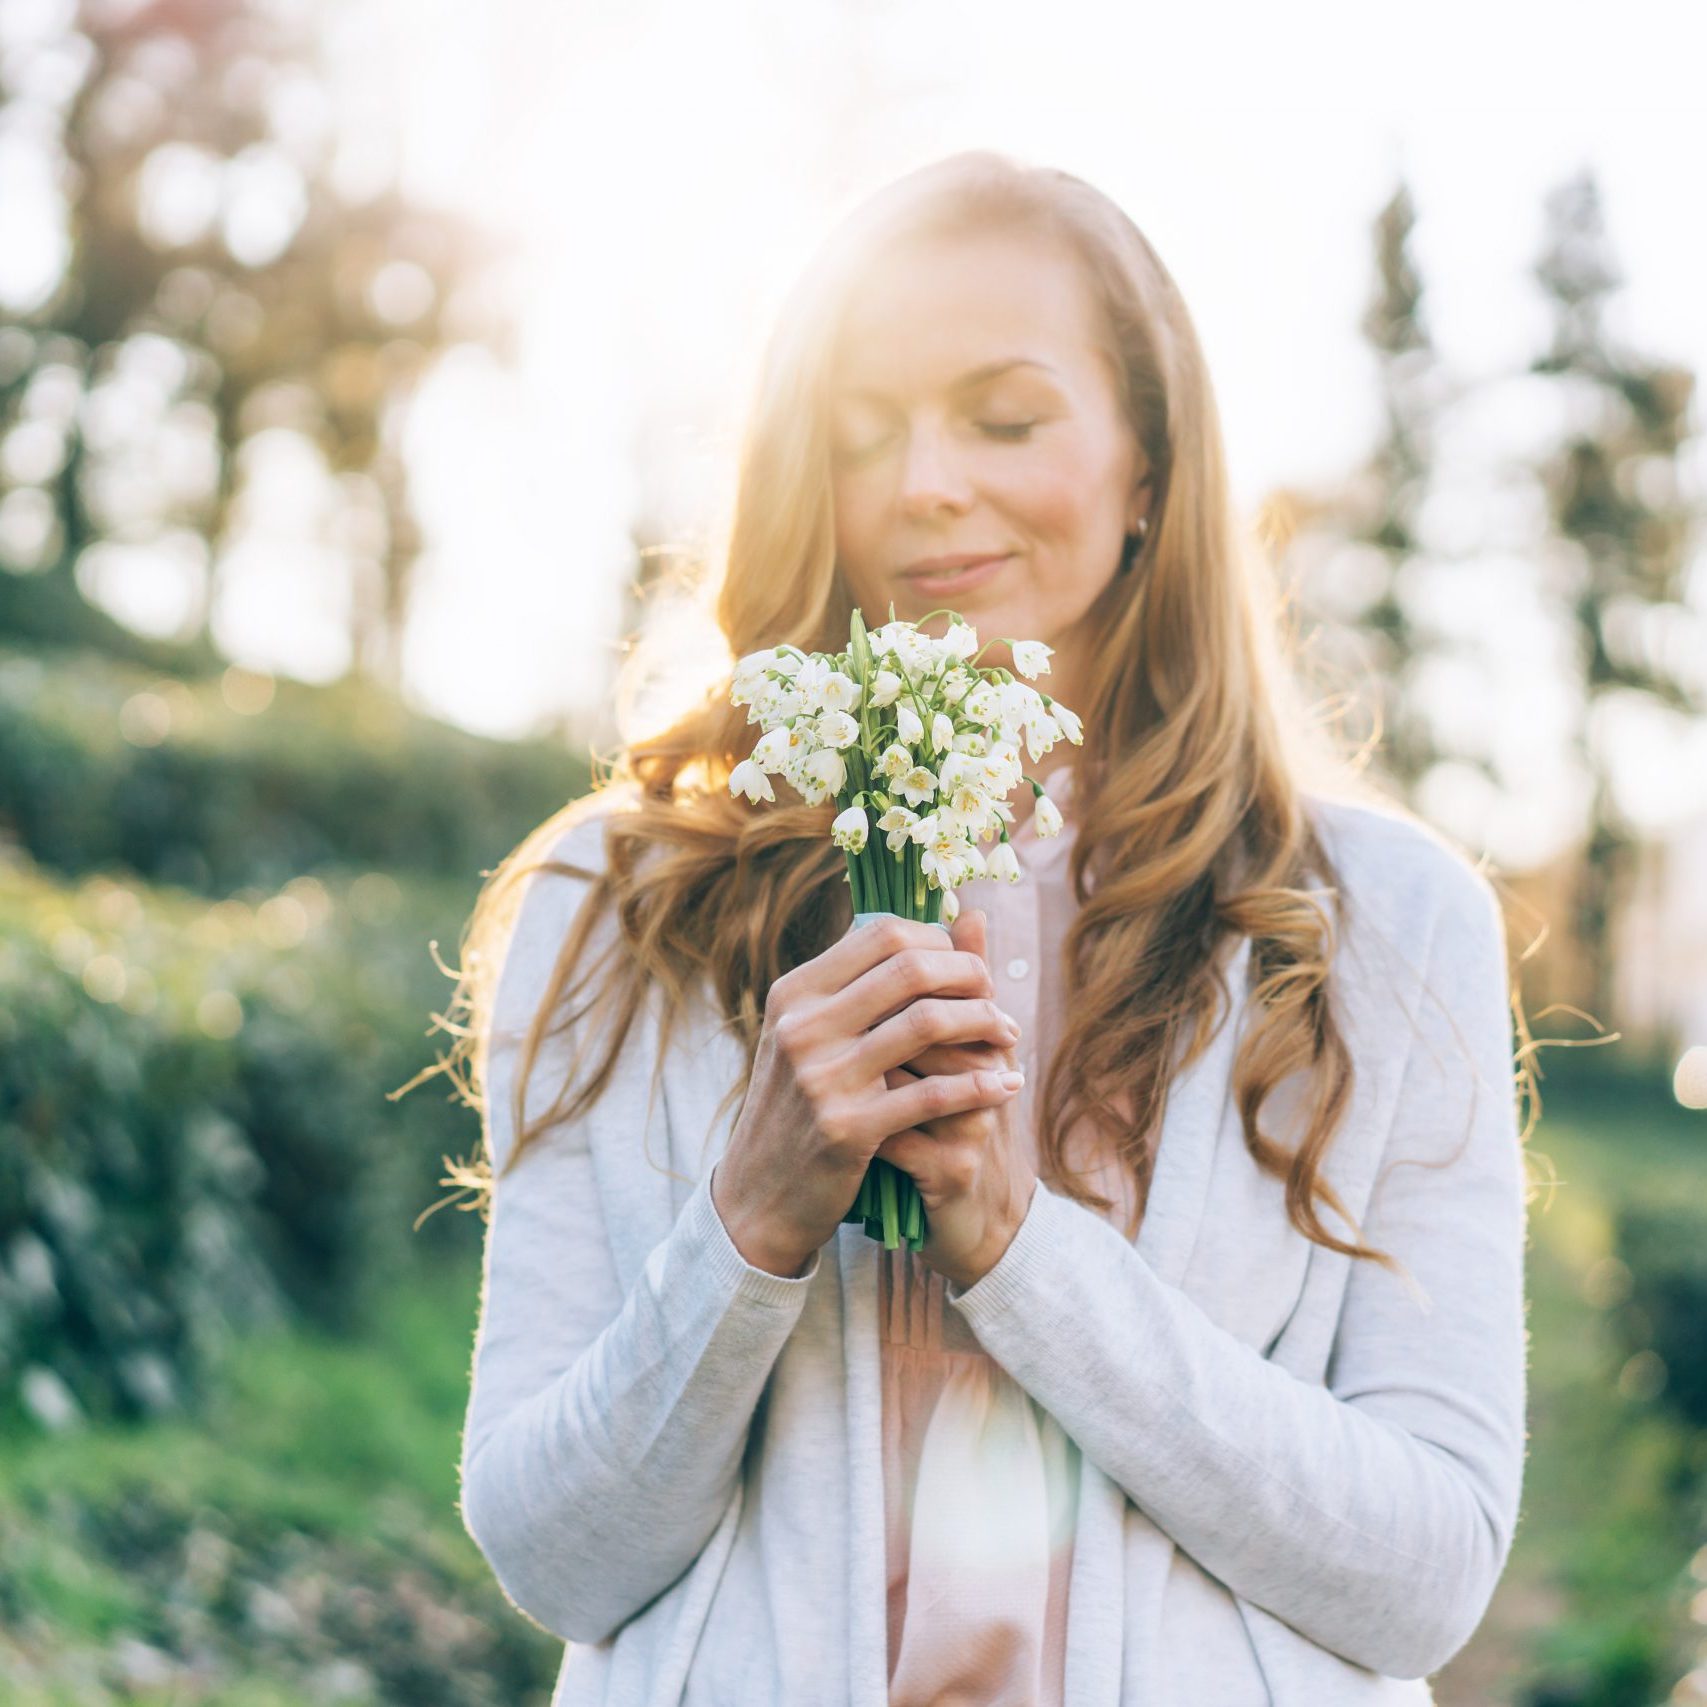 Woman in backlight smelling and showing off her beautiful snowdrops flowers bouquet. Perfect image with copy space.